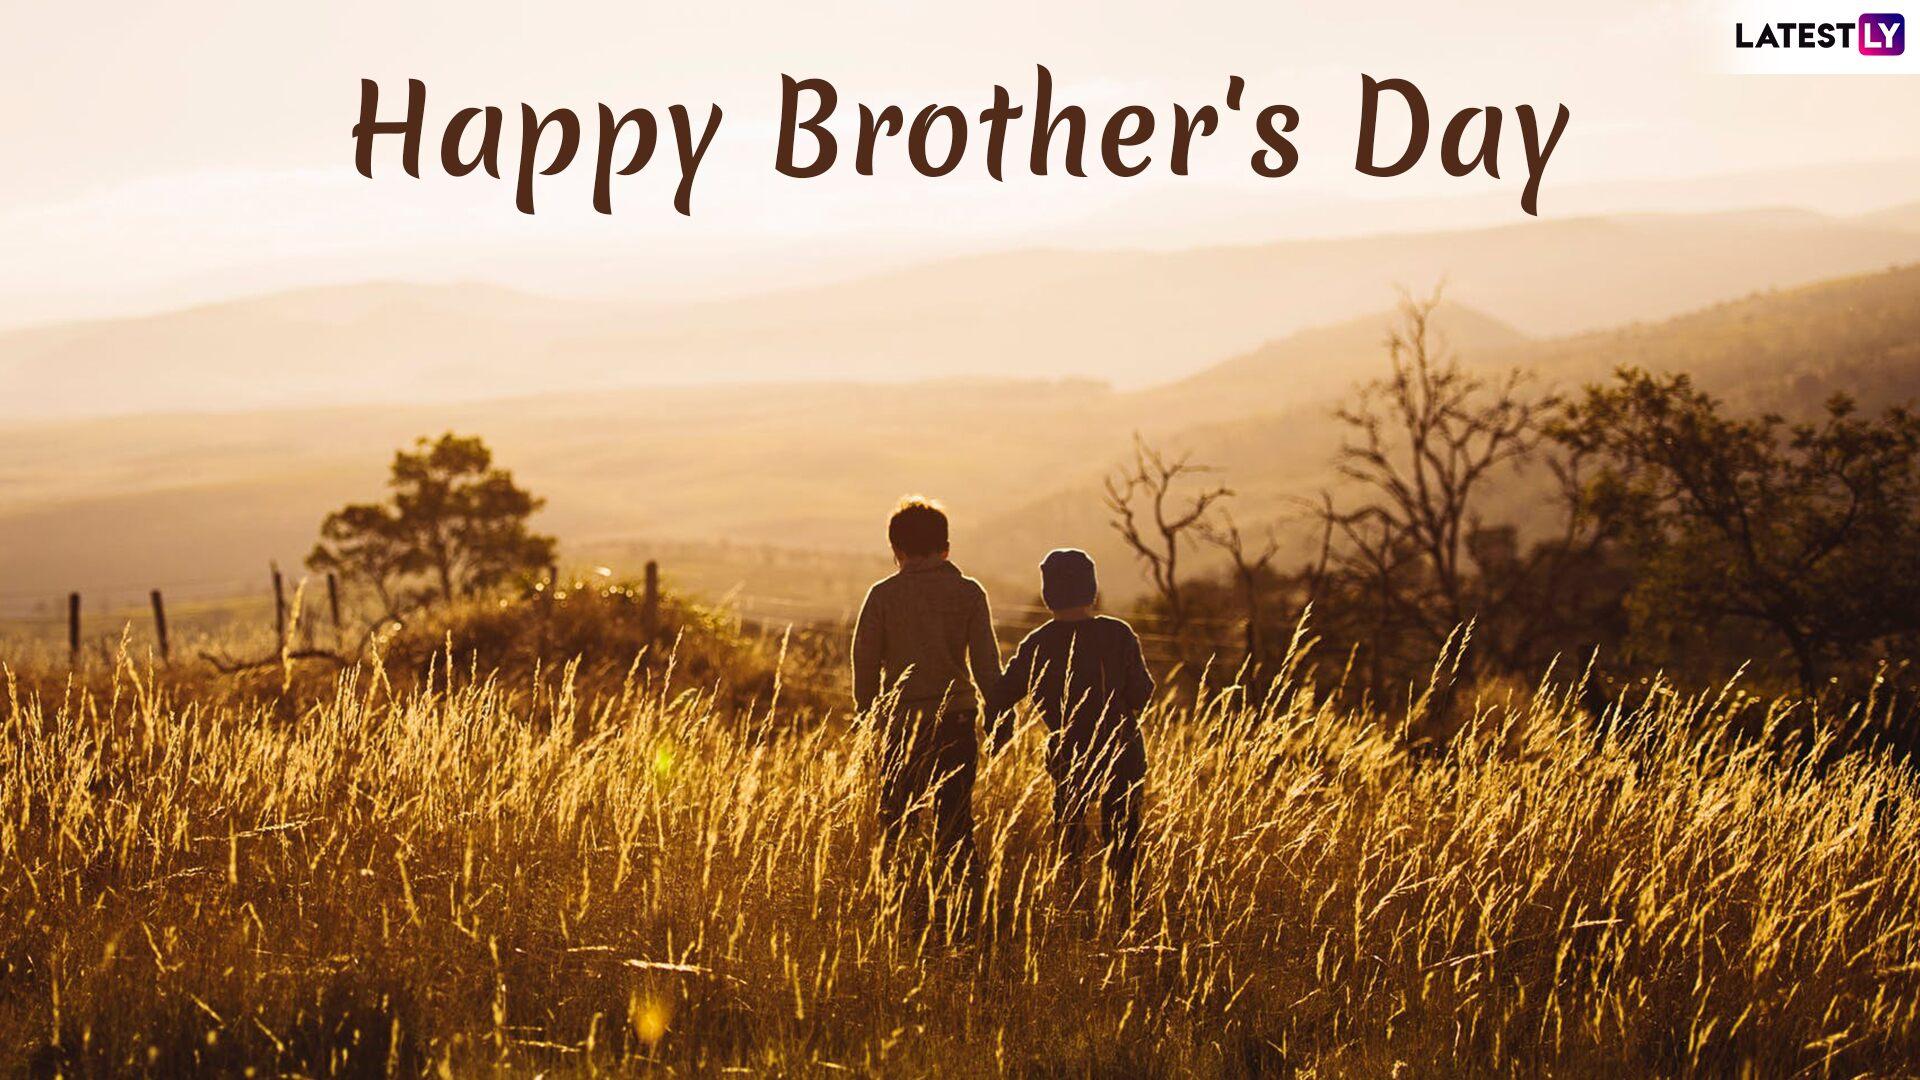 National Brother's Day Image & HD Wallpaper for Free Download